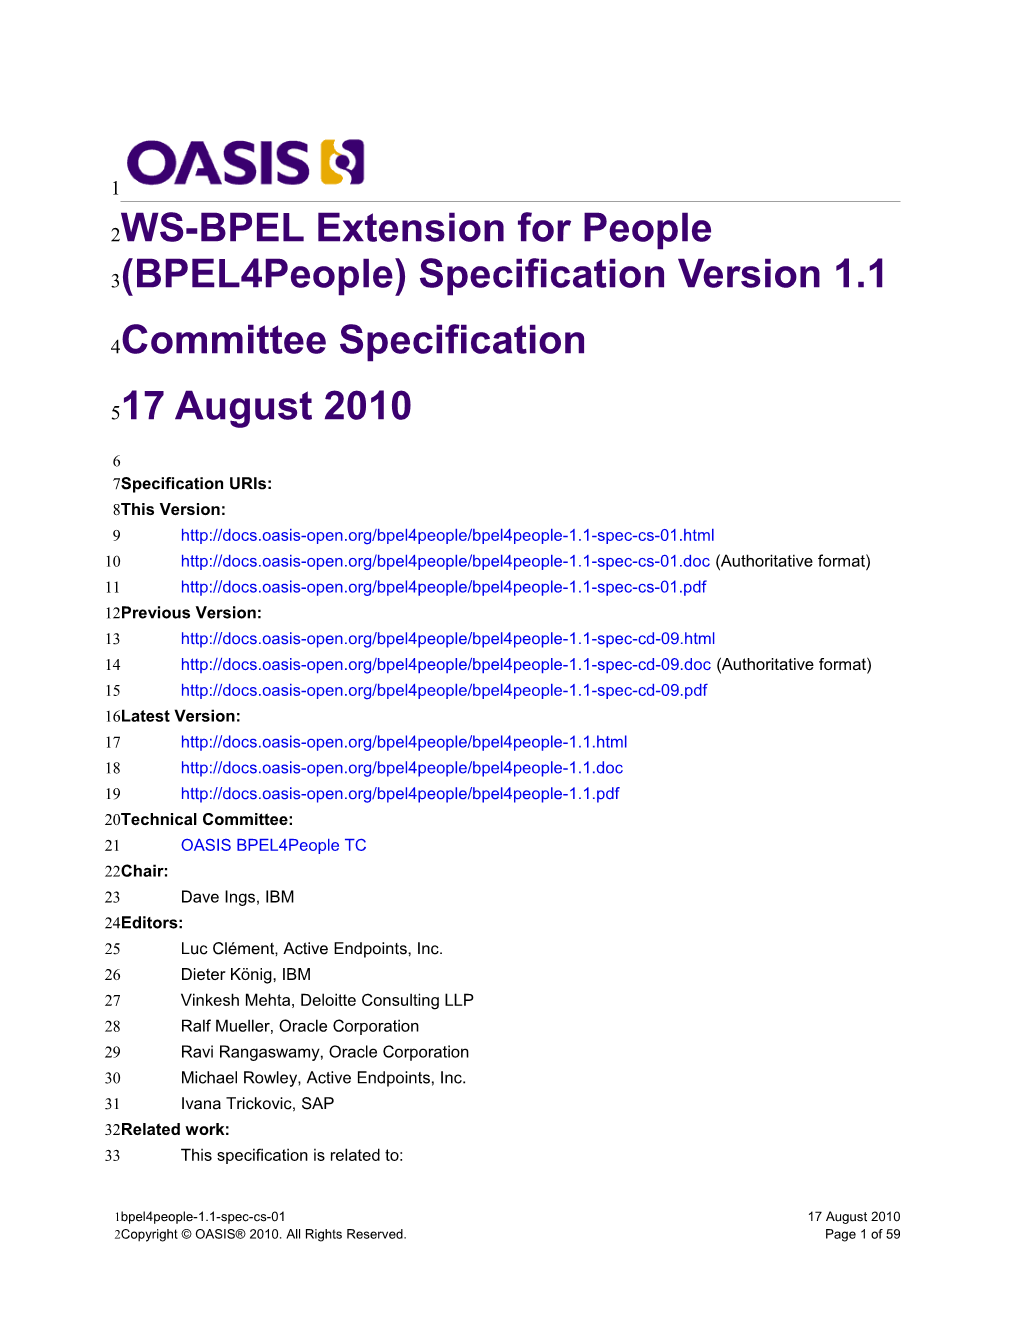 OASIS WS-BPEL Extension for People (Bpel4people)